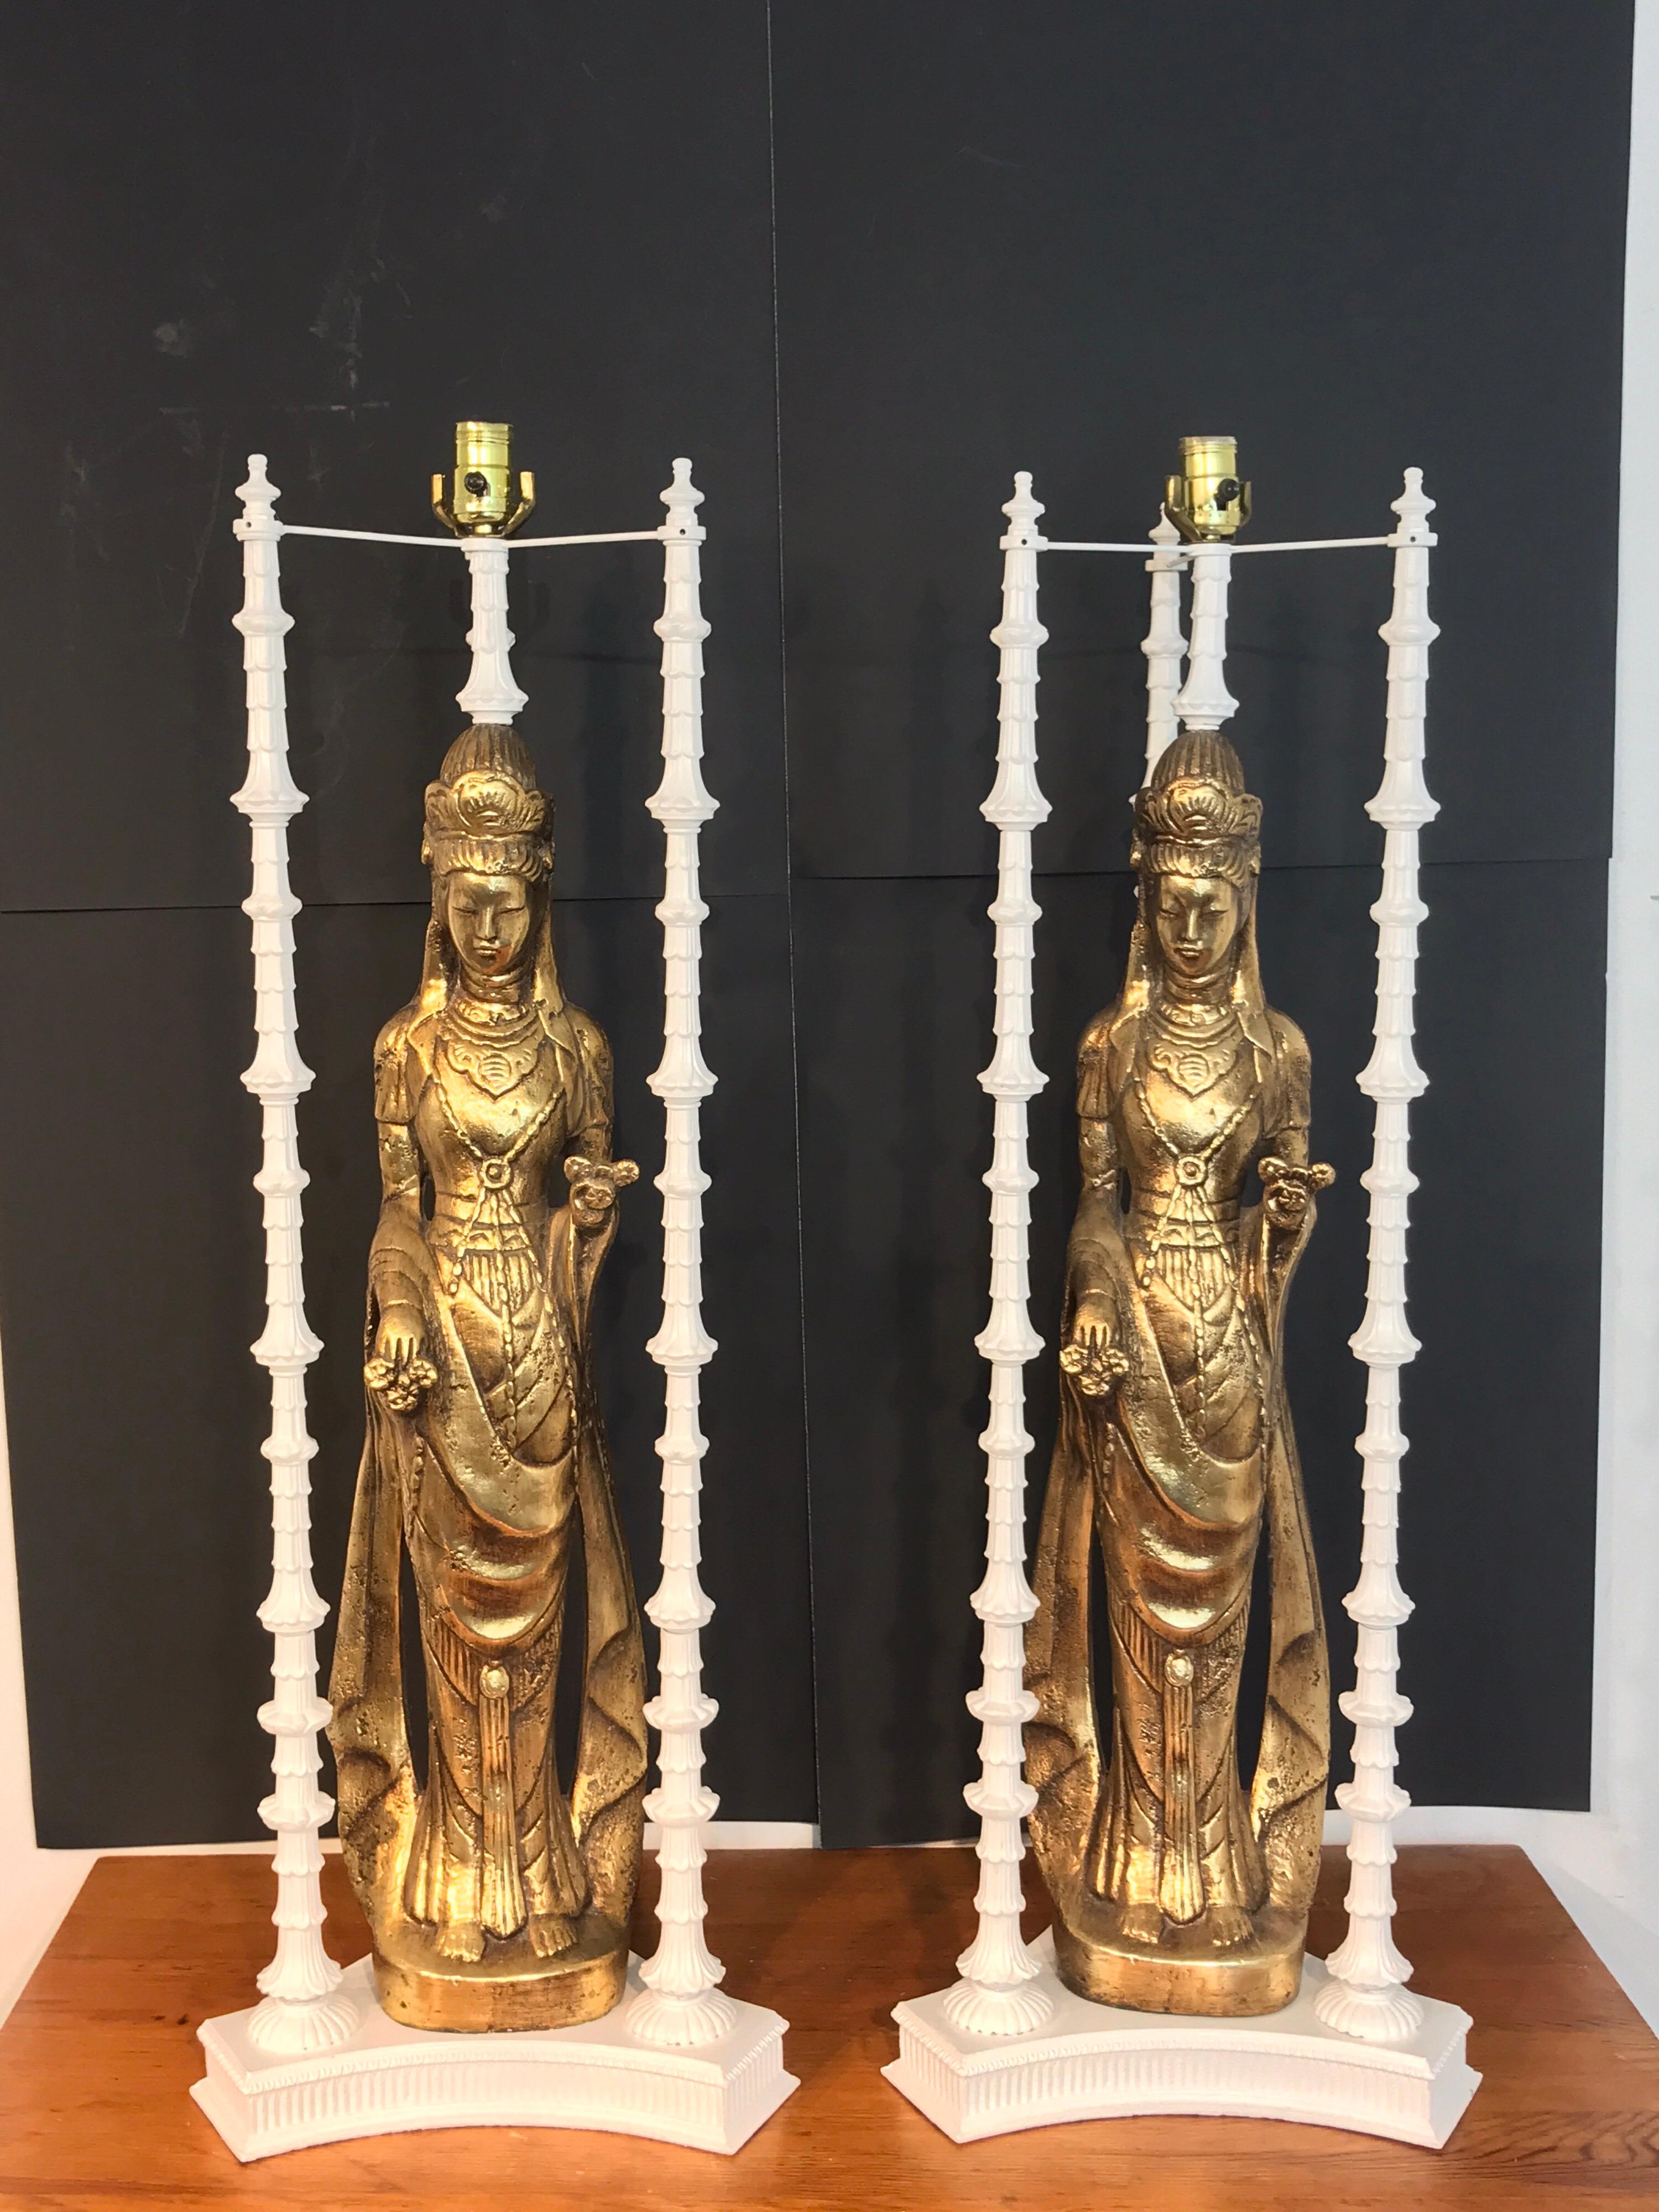 Pair of large scale gilt Quan Yin lamps, in the style of James Mont, each with a 30